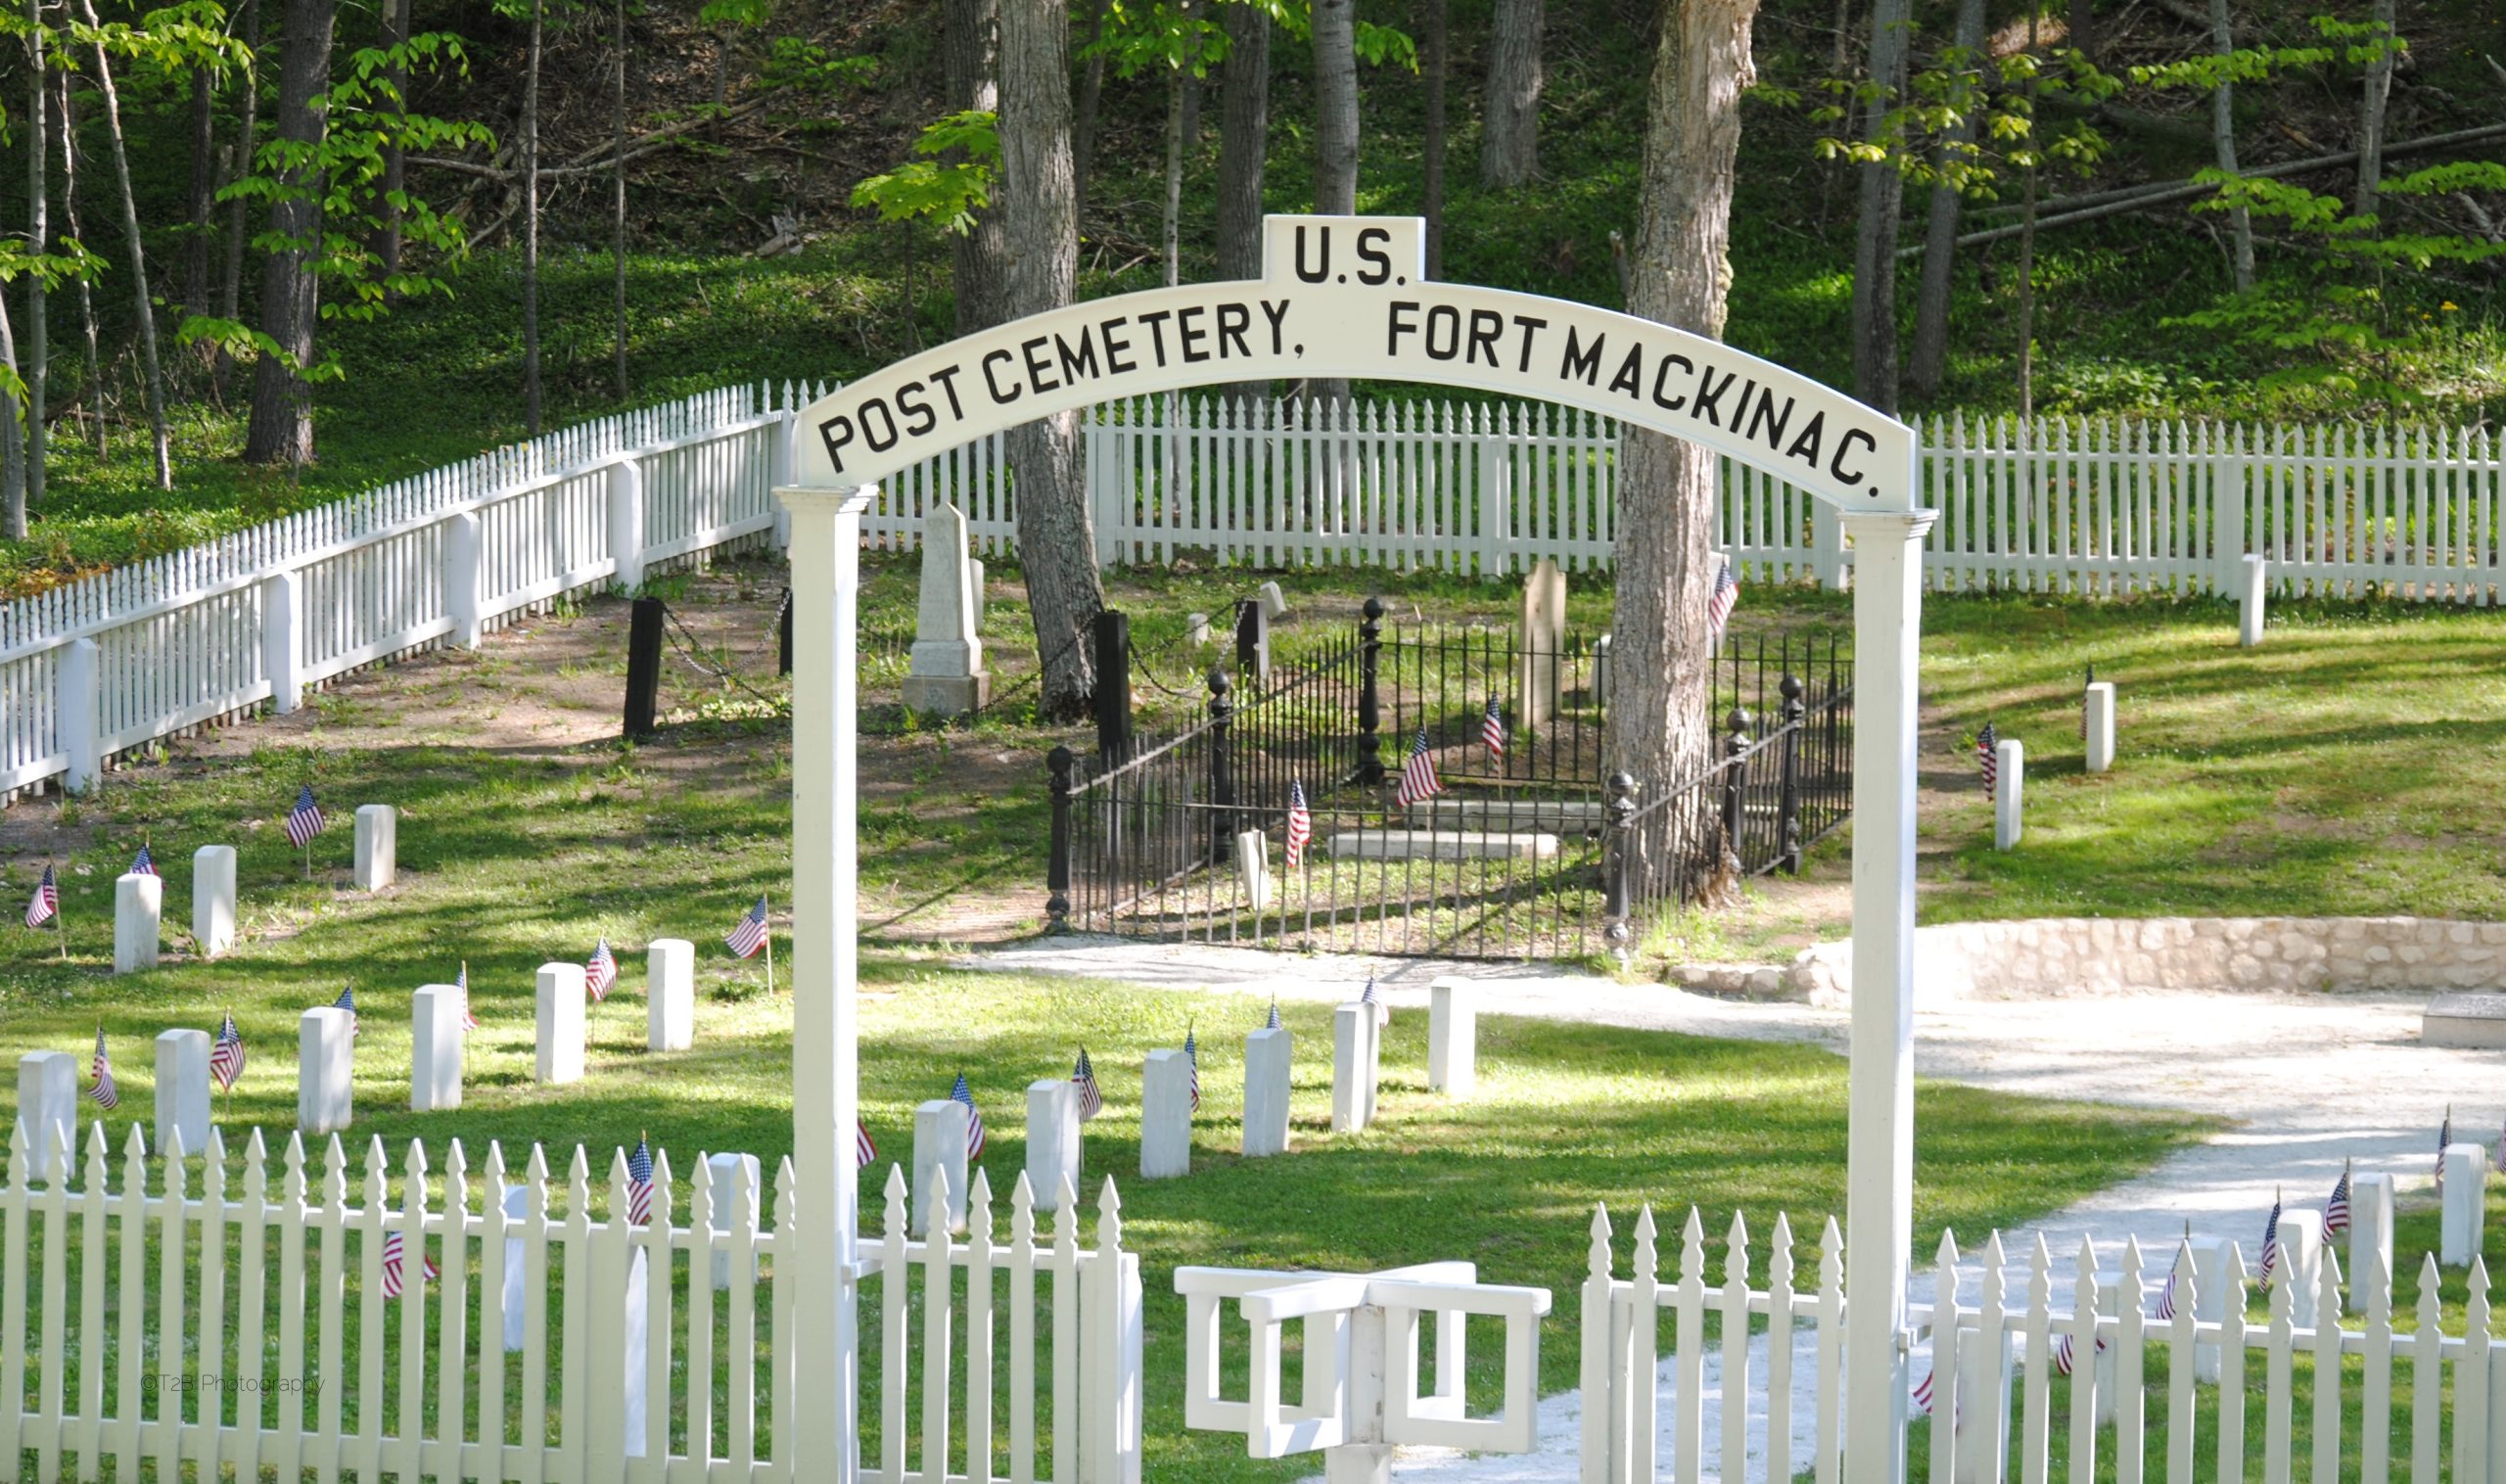 Cemetery surrounded by a white picket fence with an archway reading the words "U.S. Post Cemetery, Fort Mackinac"